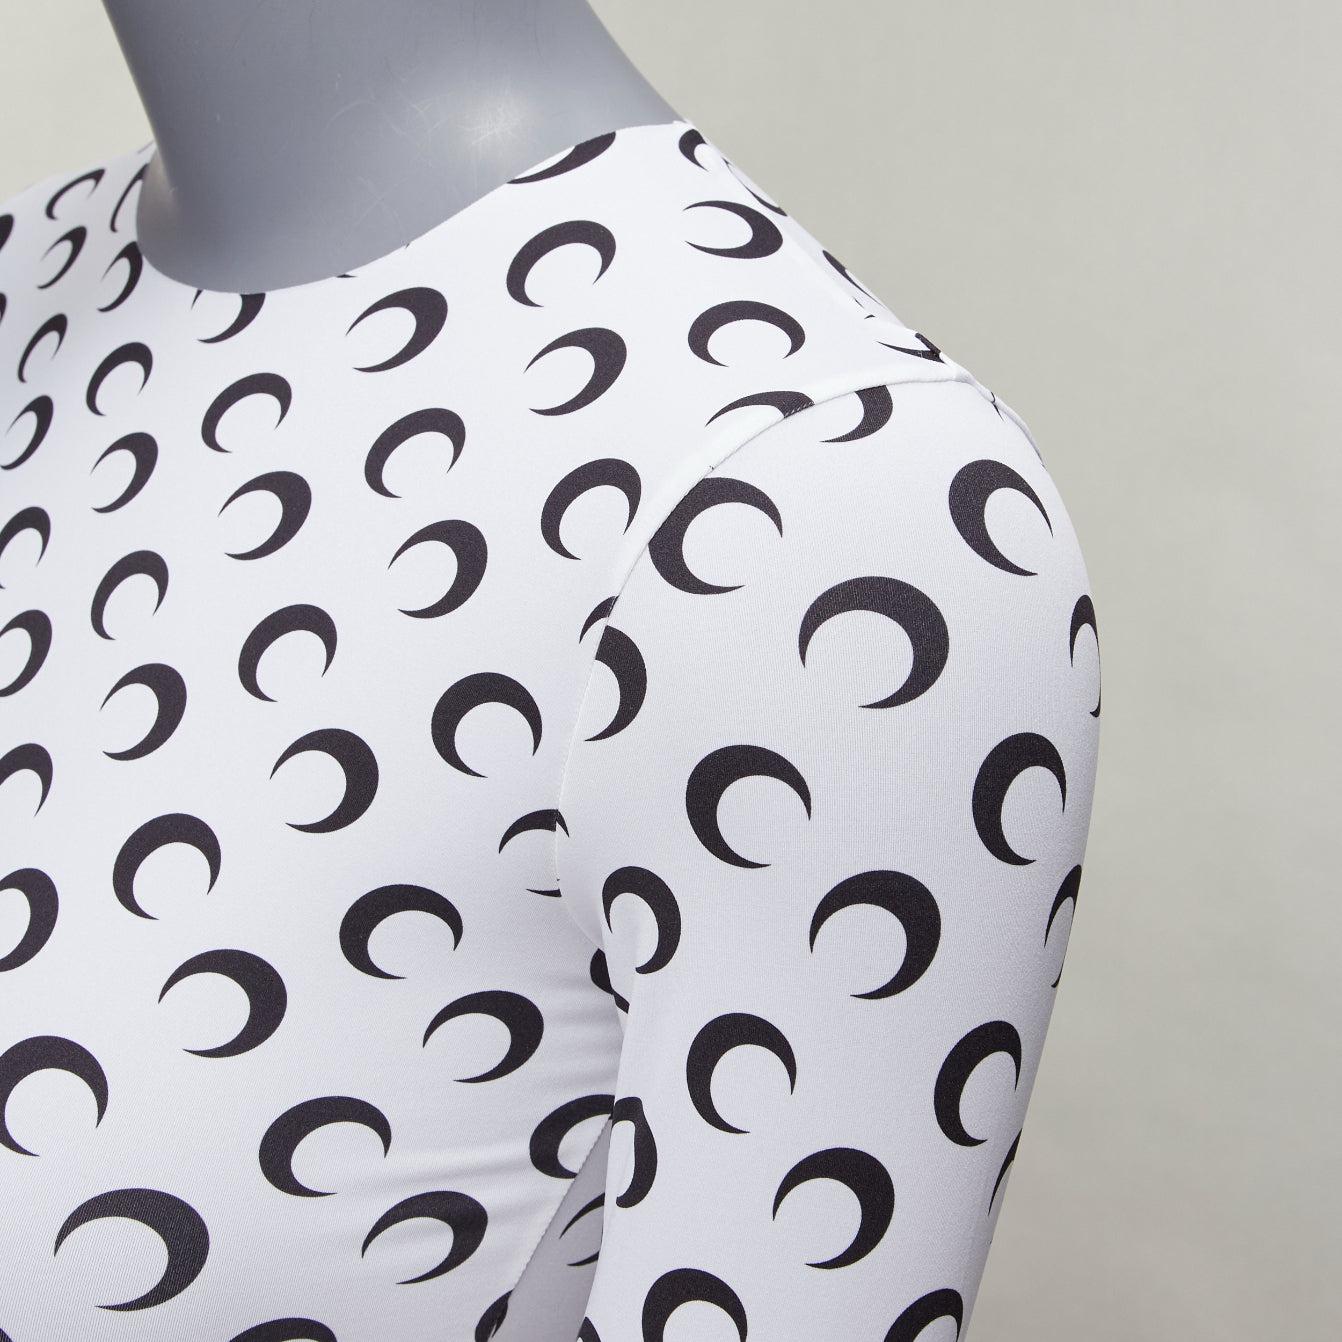 MARINE SERRE White Line black crescent moon print second skin stretch top S
Reference: AAWC/A00741
Brand: Marine Serre
Material: Polyamide, Elastane
Color: White, Black
Pattern: Monogram
Closure: Pullover
Lining: Unlined
Extra Details: Second skin